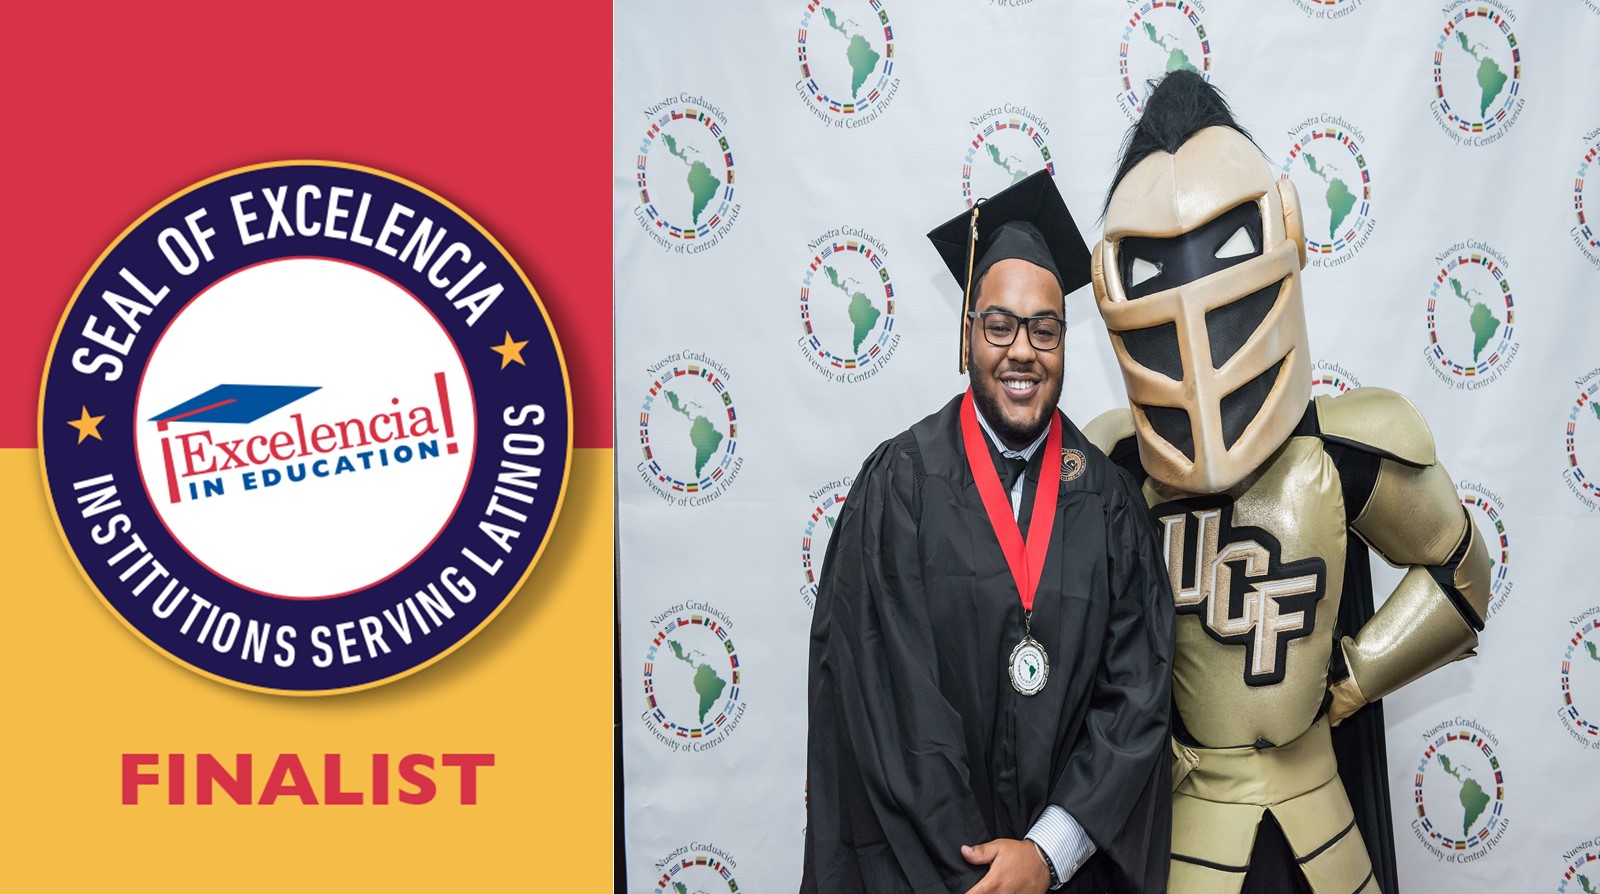 UCF Named a Finalist for National Award Recognizing Service to Latino Students